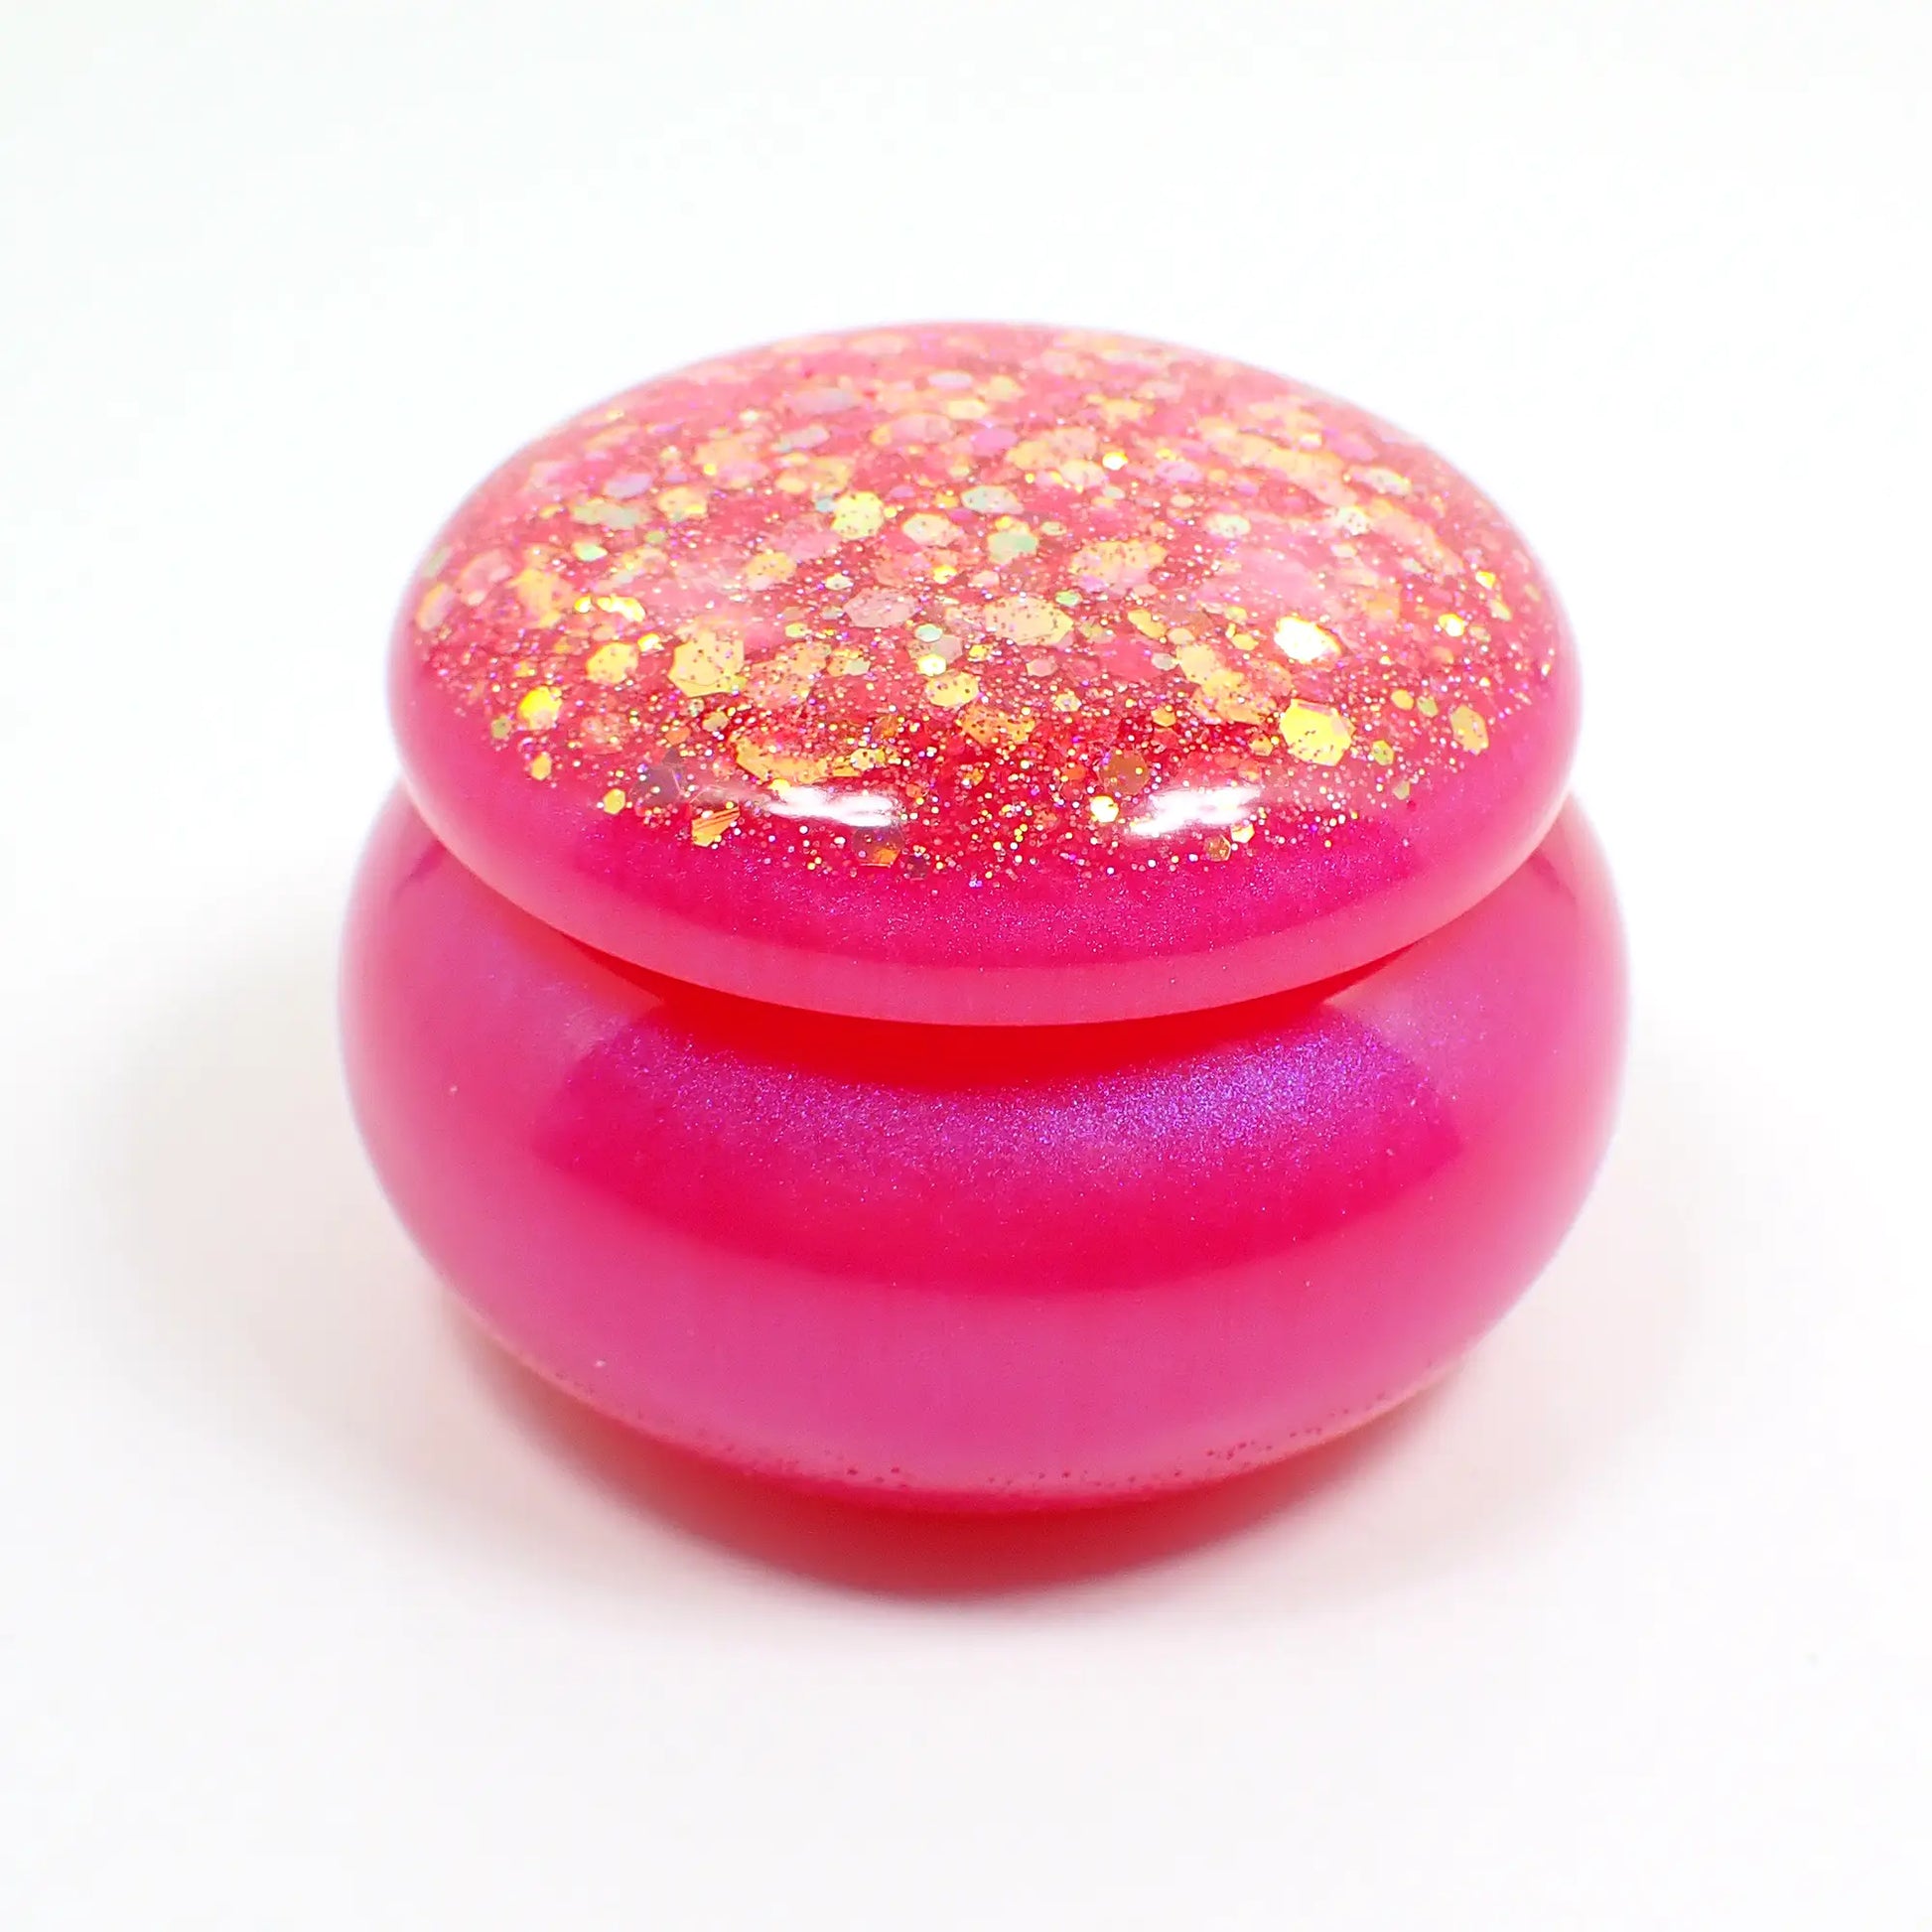 Side view of the small handmade resin trinket jar. It has a rounded shape. The bottom has pearly pink resin and the lid has chunky iridescent pink glitter.